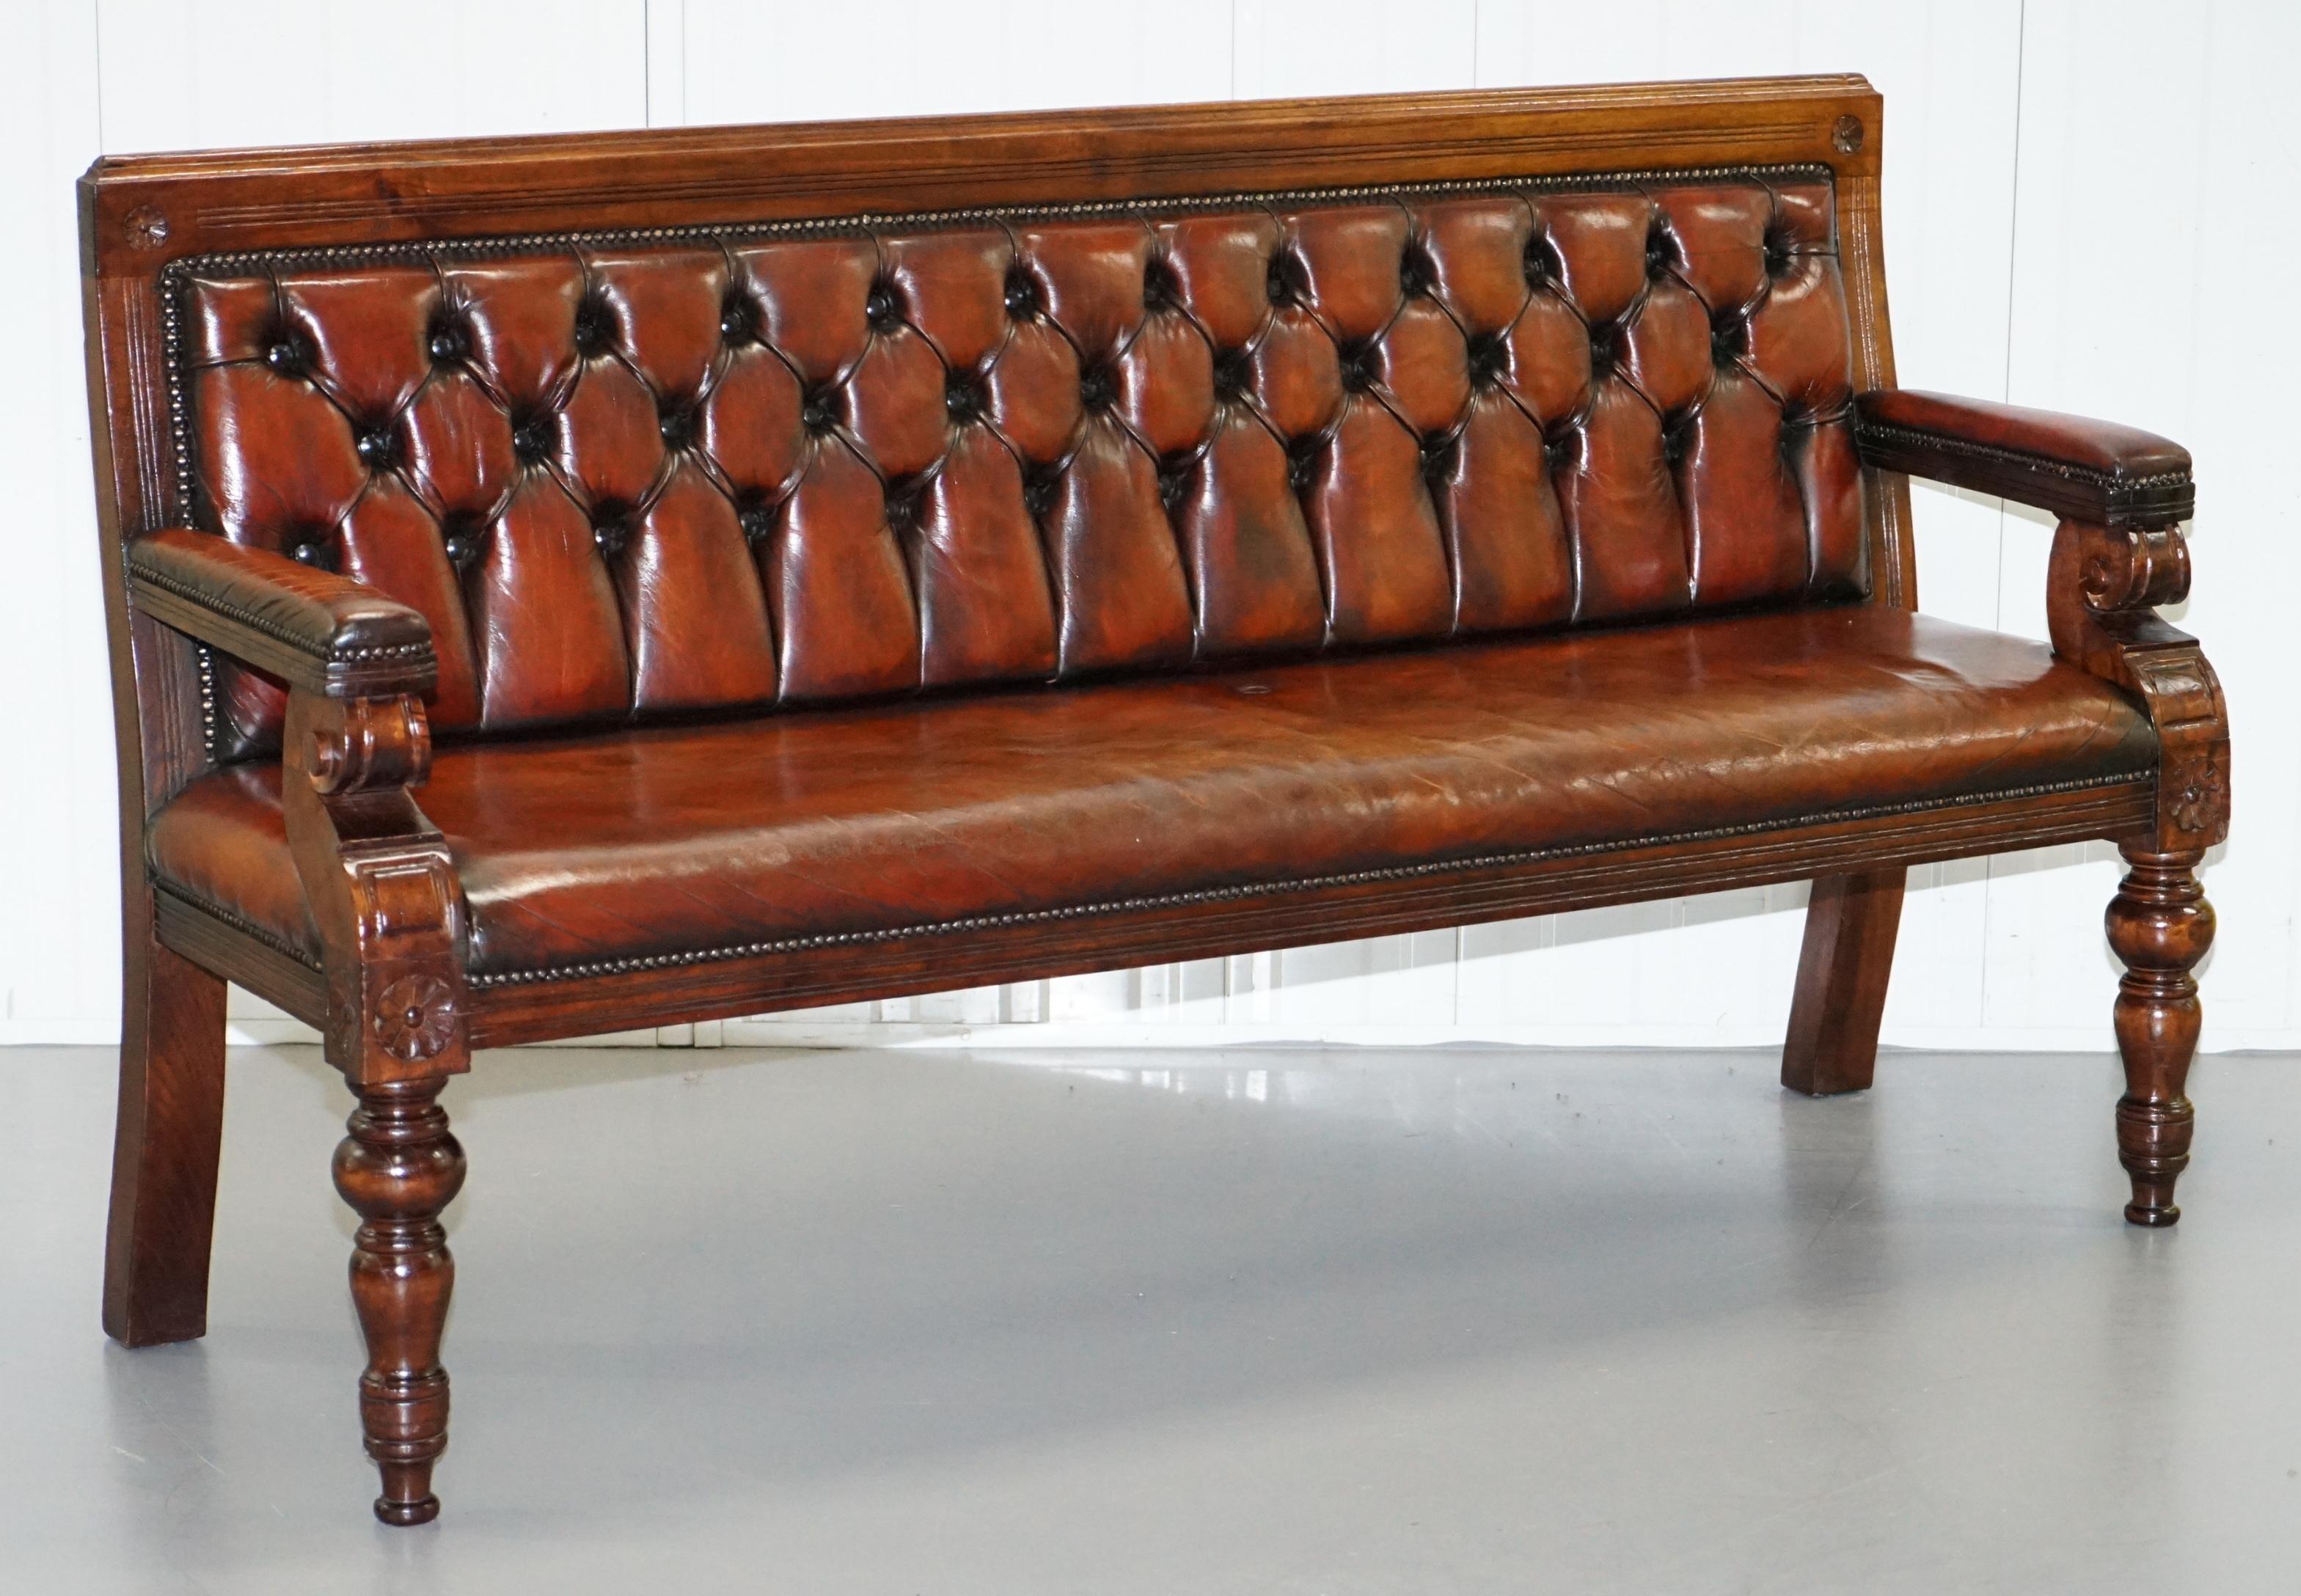 English Stunning Fully Restored Chesterfield Brown Leather Mahogany Bench Part of Suite